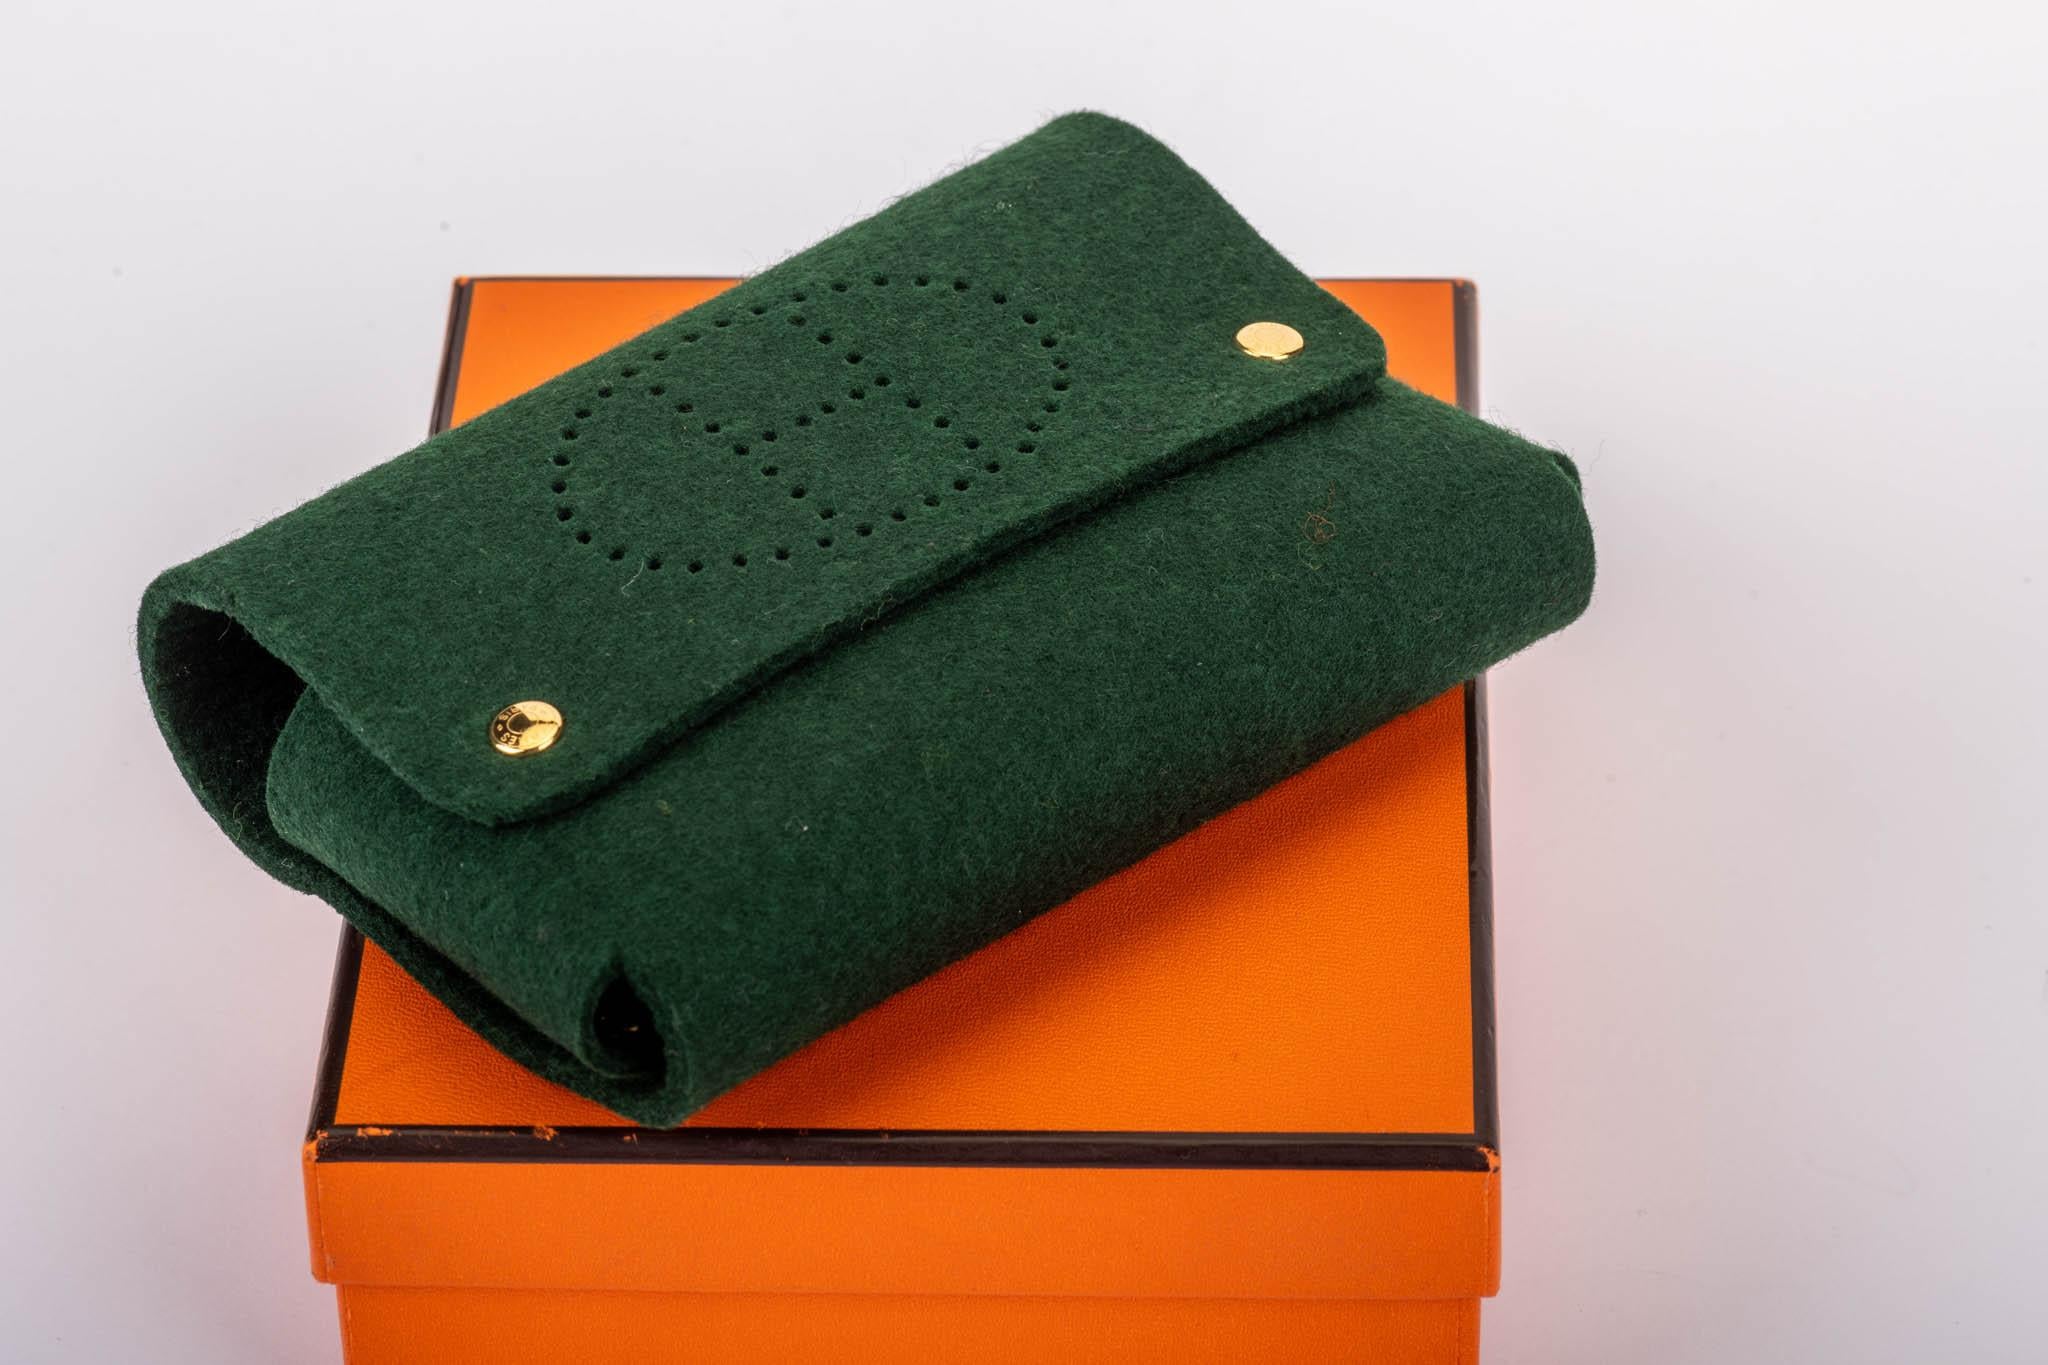 Hermès multifunctional felt pouch, with H perforated logo on front. Comes with original box.